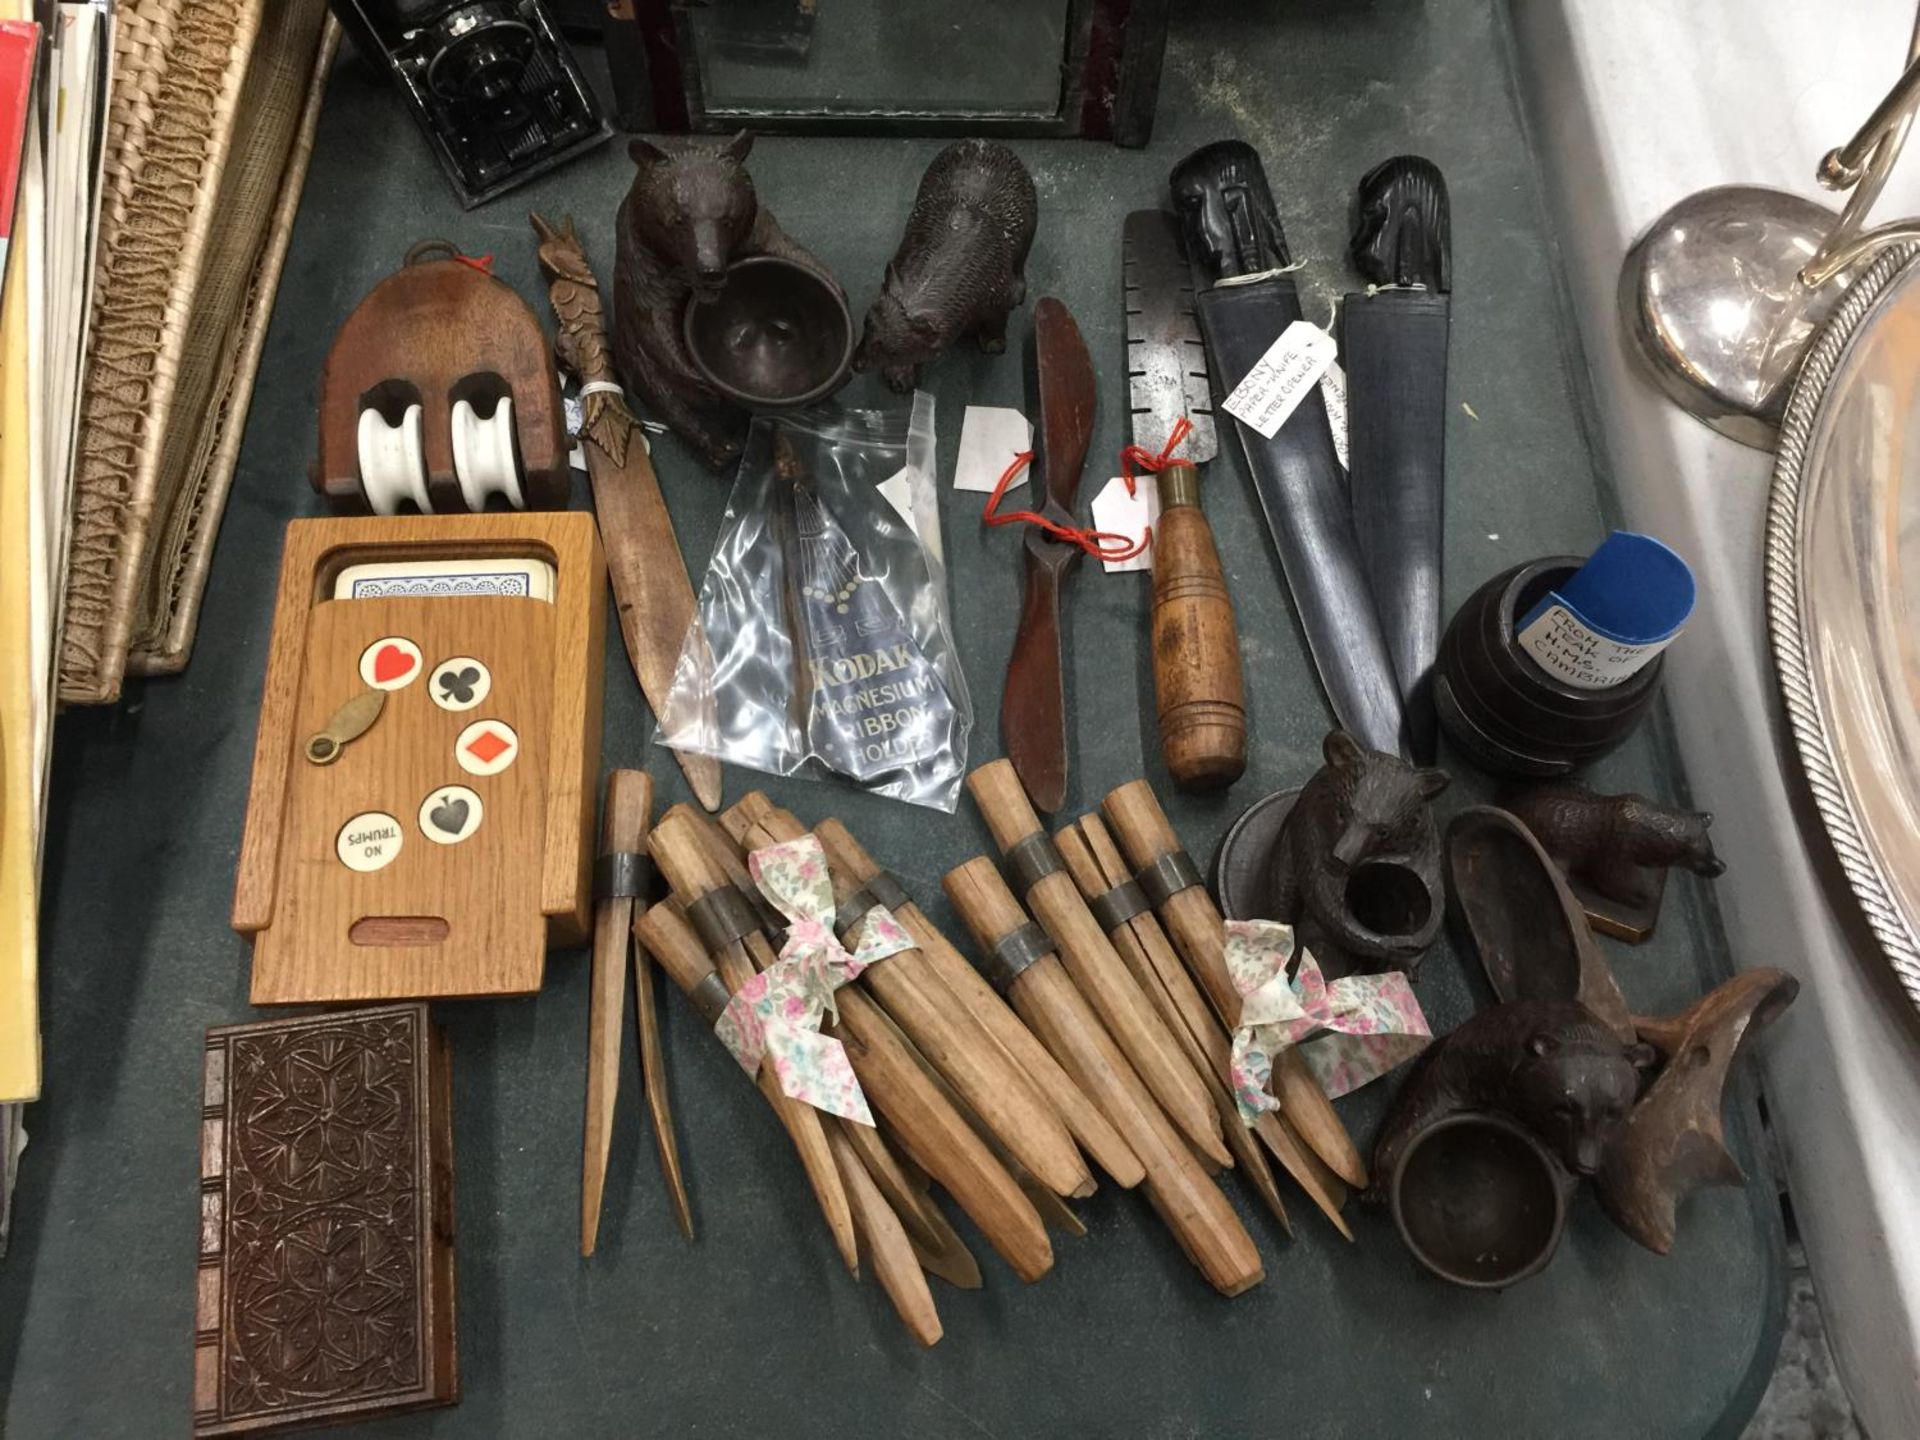 A MIXED LOT OF TREEN ITEMS TO INCLUDE BLACK FOREST BEARS, WOODEN PEGS, A BRIDGE BOX, EBONY PAPER